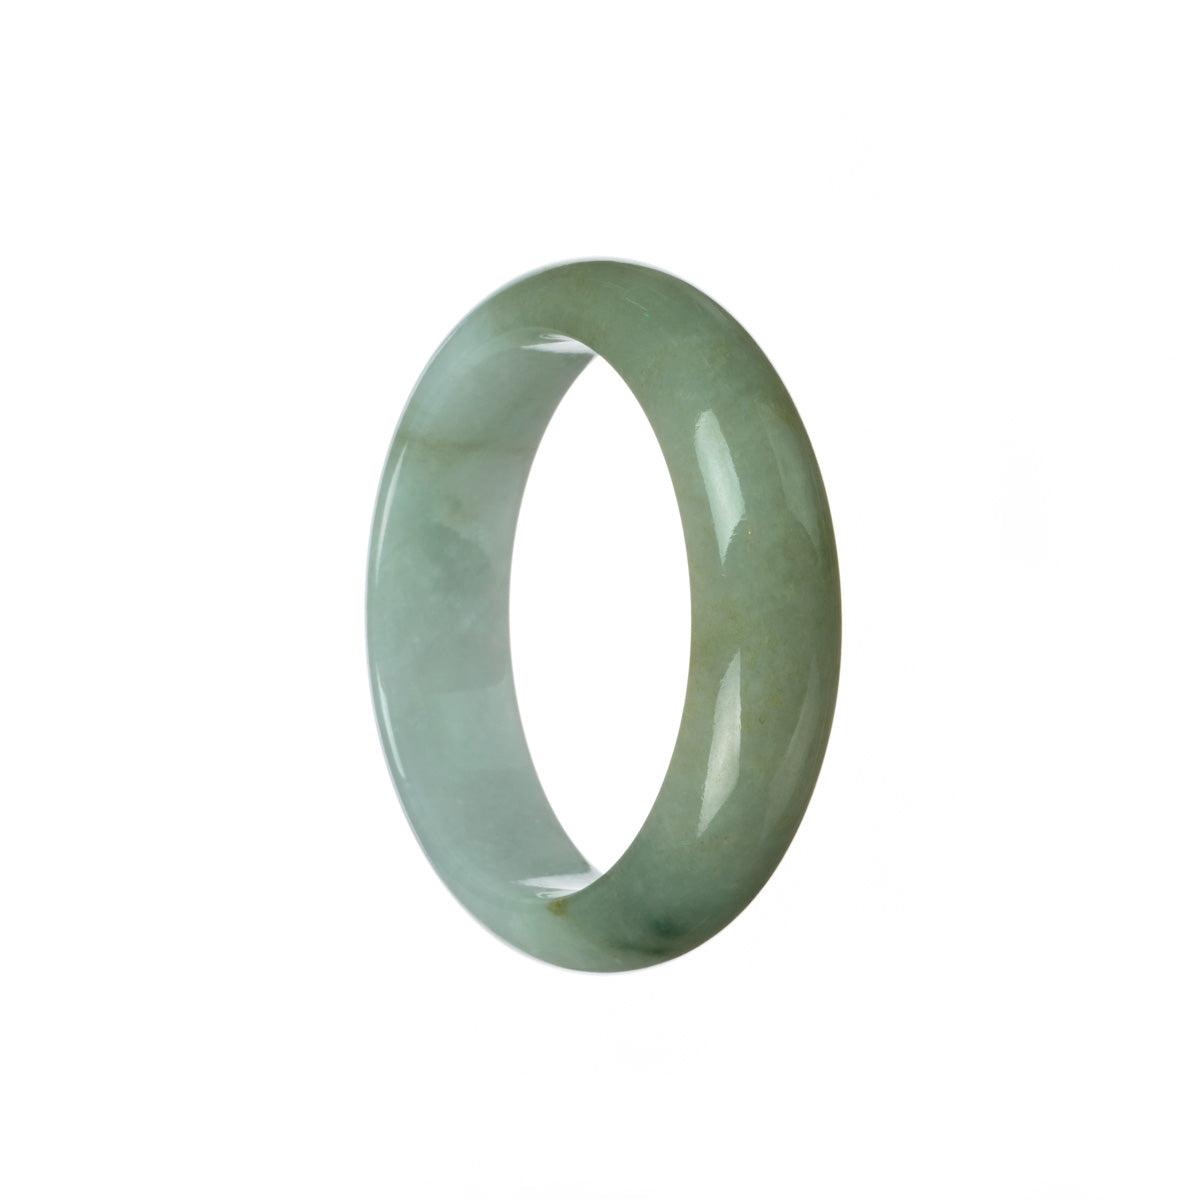 A close-up image of an authentic Grade A green with pale lavender Burmese jade bangle. The bangle has a half-moon shape and measures 53mm in diameter. This exquisite piece of jewelry is available at MAYS GEMS.